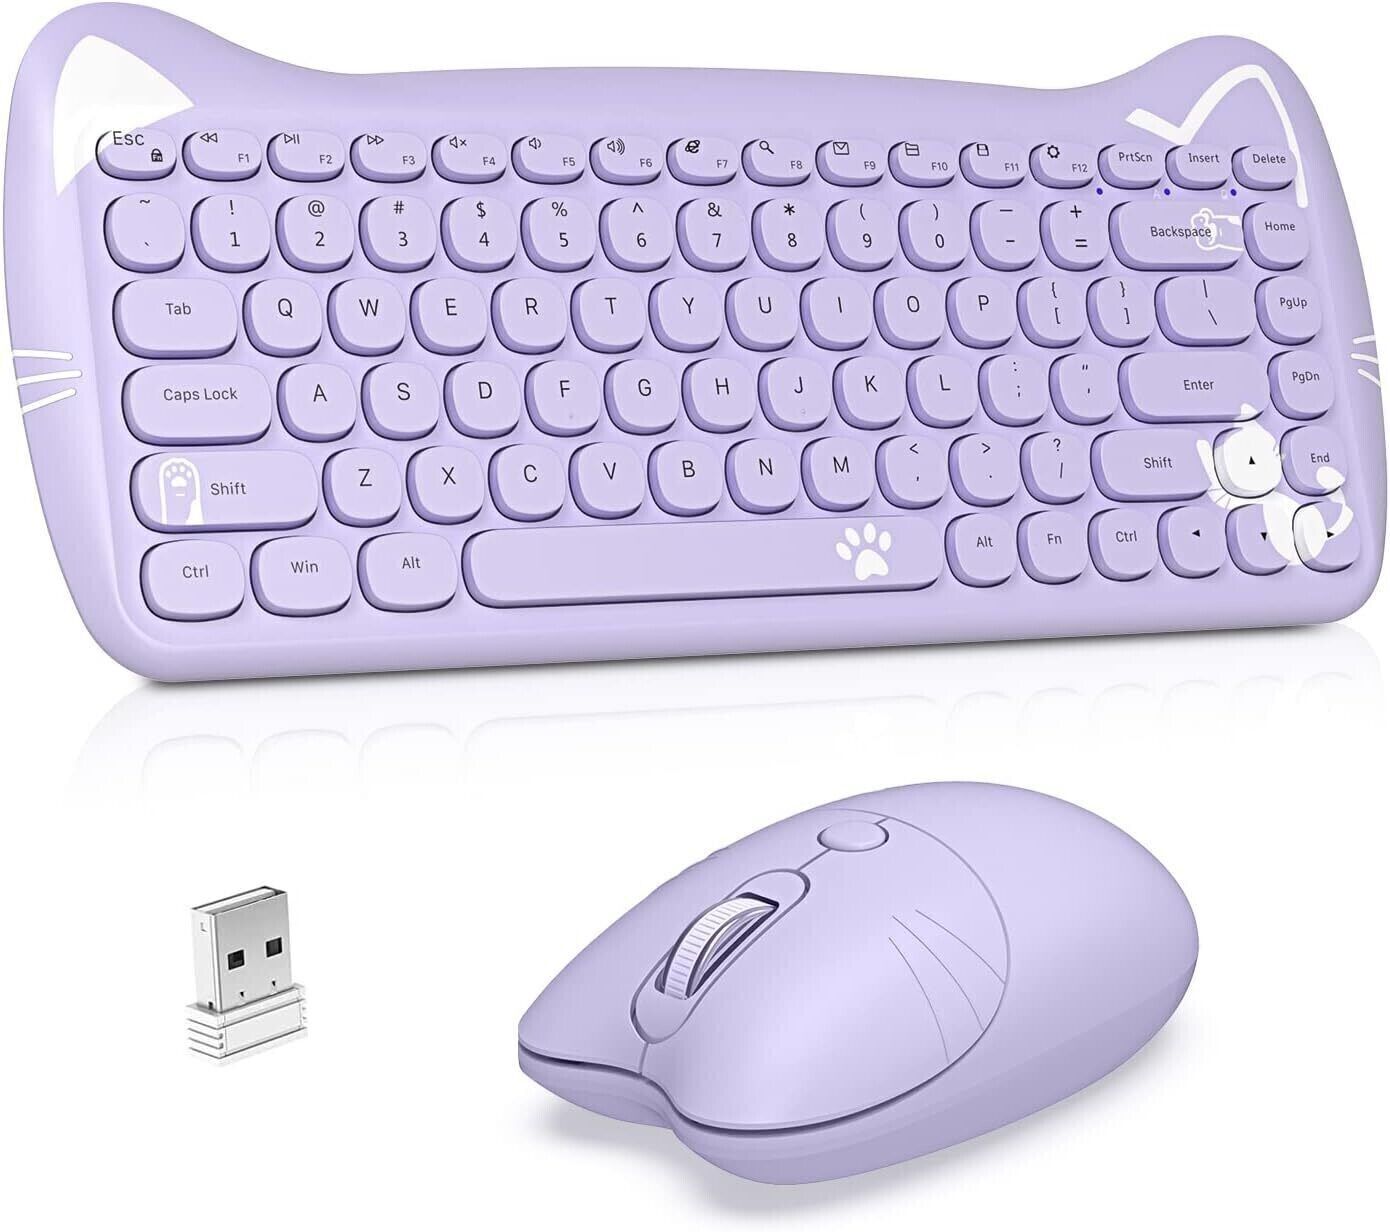 Cute Cat 2.4G Wireless Keyboard and Mouse Combo for Office Typewriter